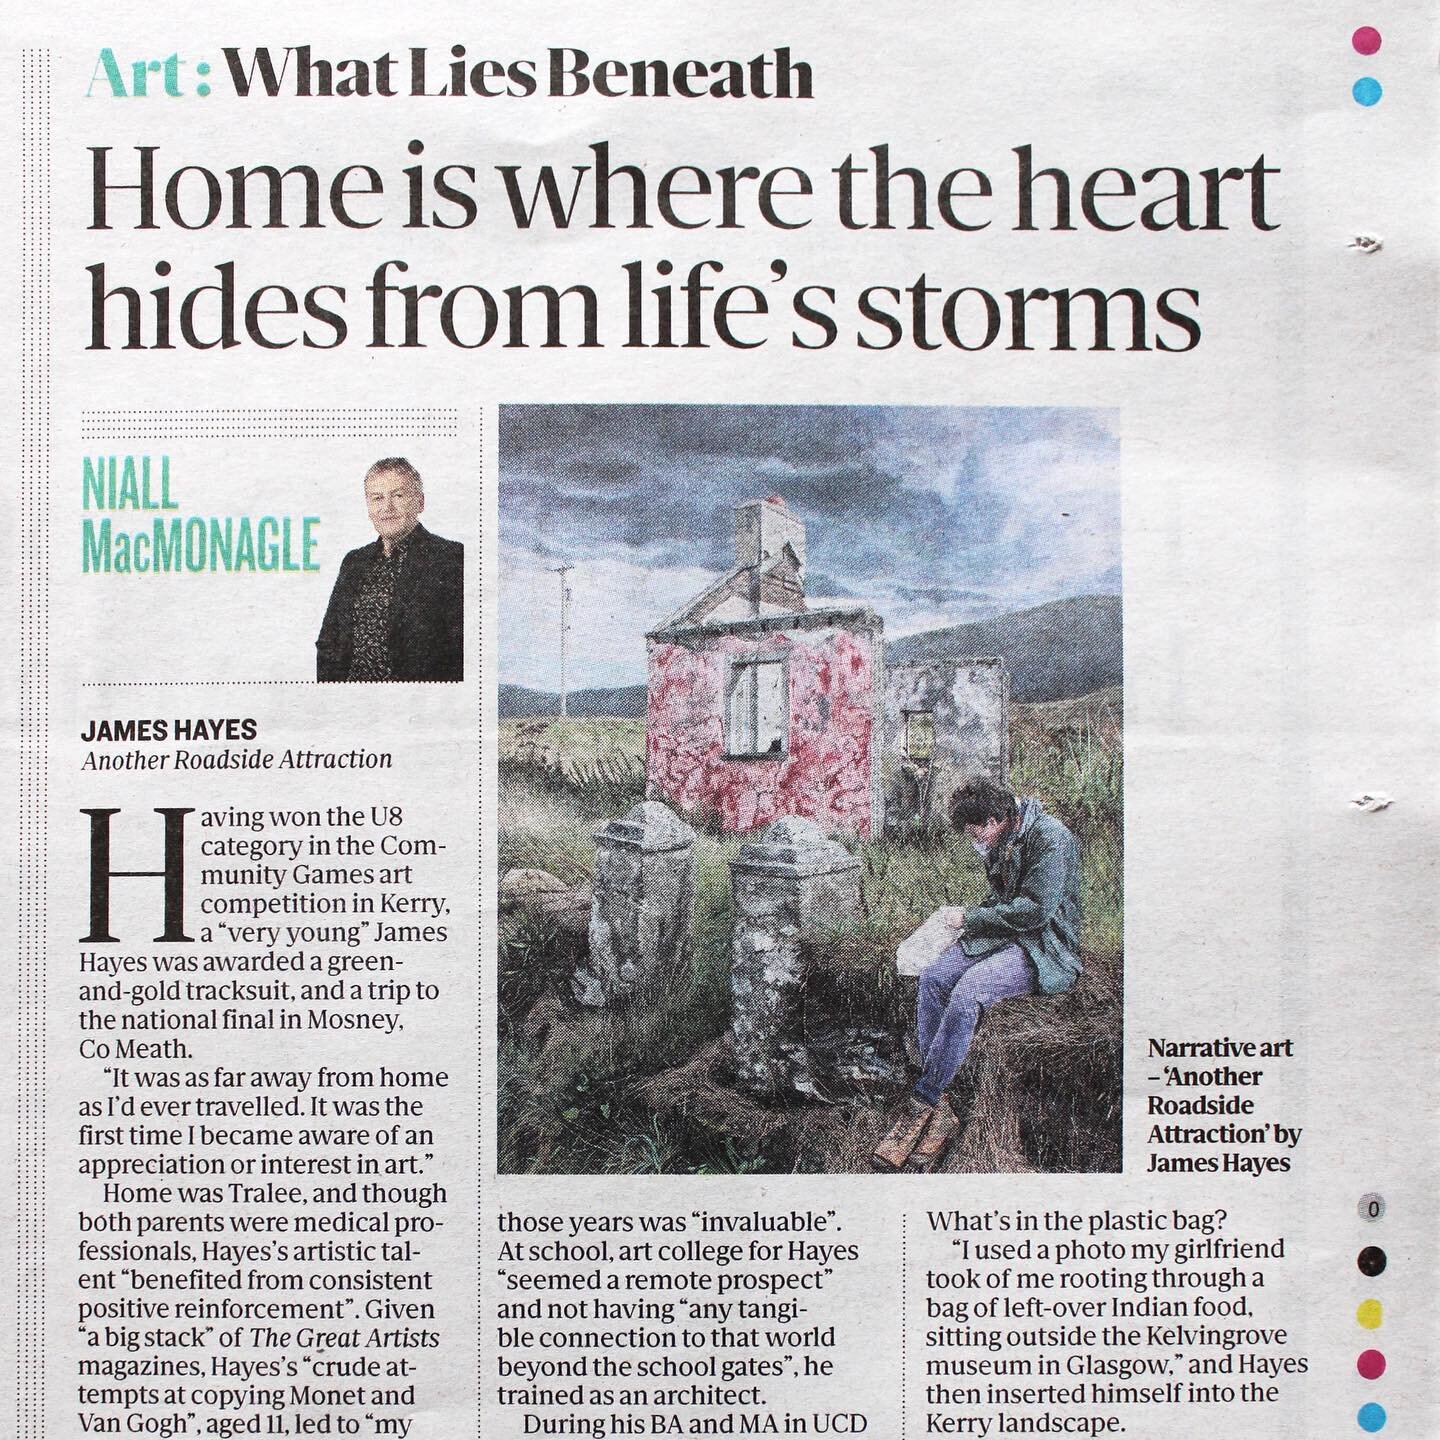 Sunday Independent - 16/07/23 Vol. 118 No. 29
.
Happy to be featured in today's Sunday Independent in Niall MacMonagle's column - 'What Lies Beneath'.
.
Sincerely grateful to Niall for shining a light on my work in this summer&rsquo;s RHA Annual Exhi